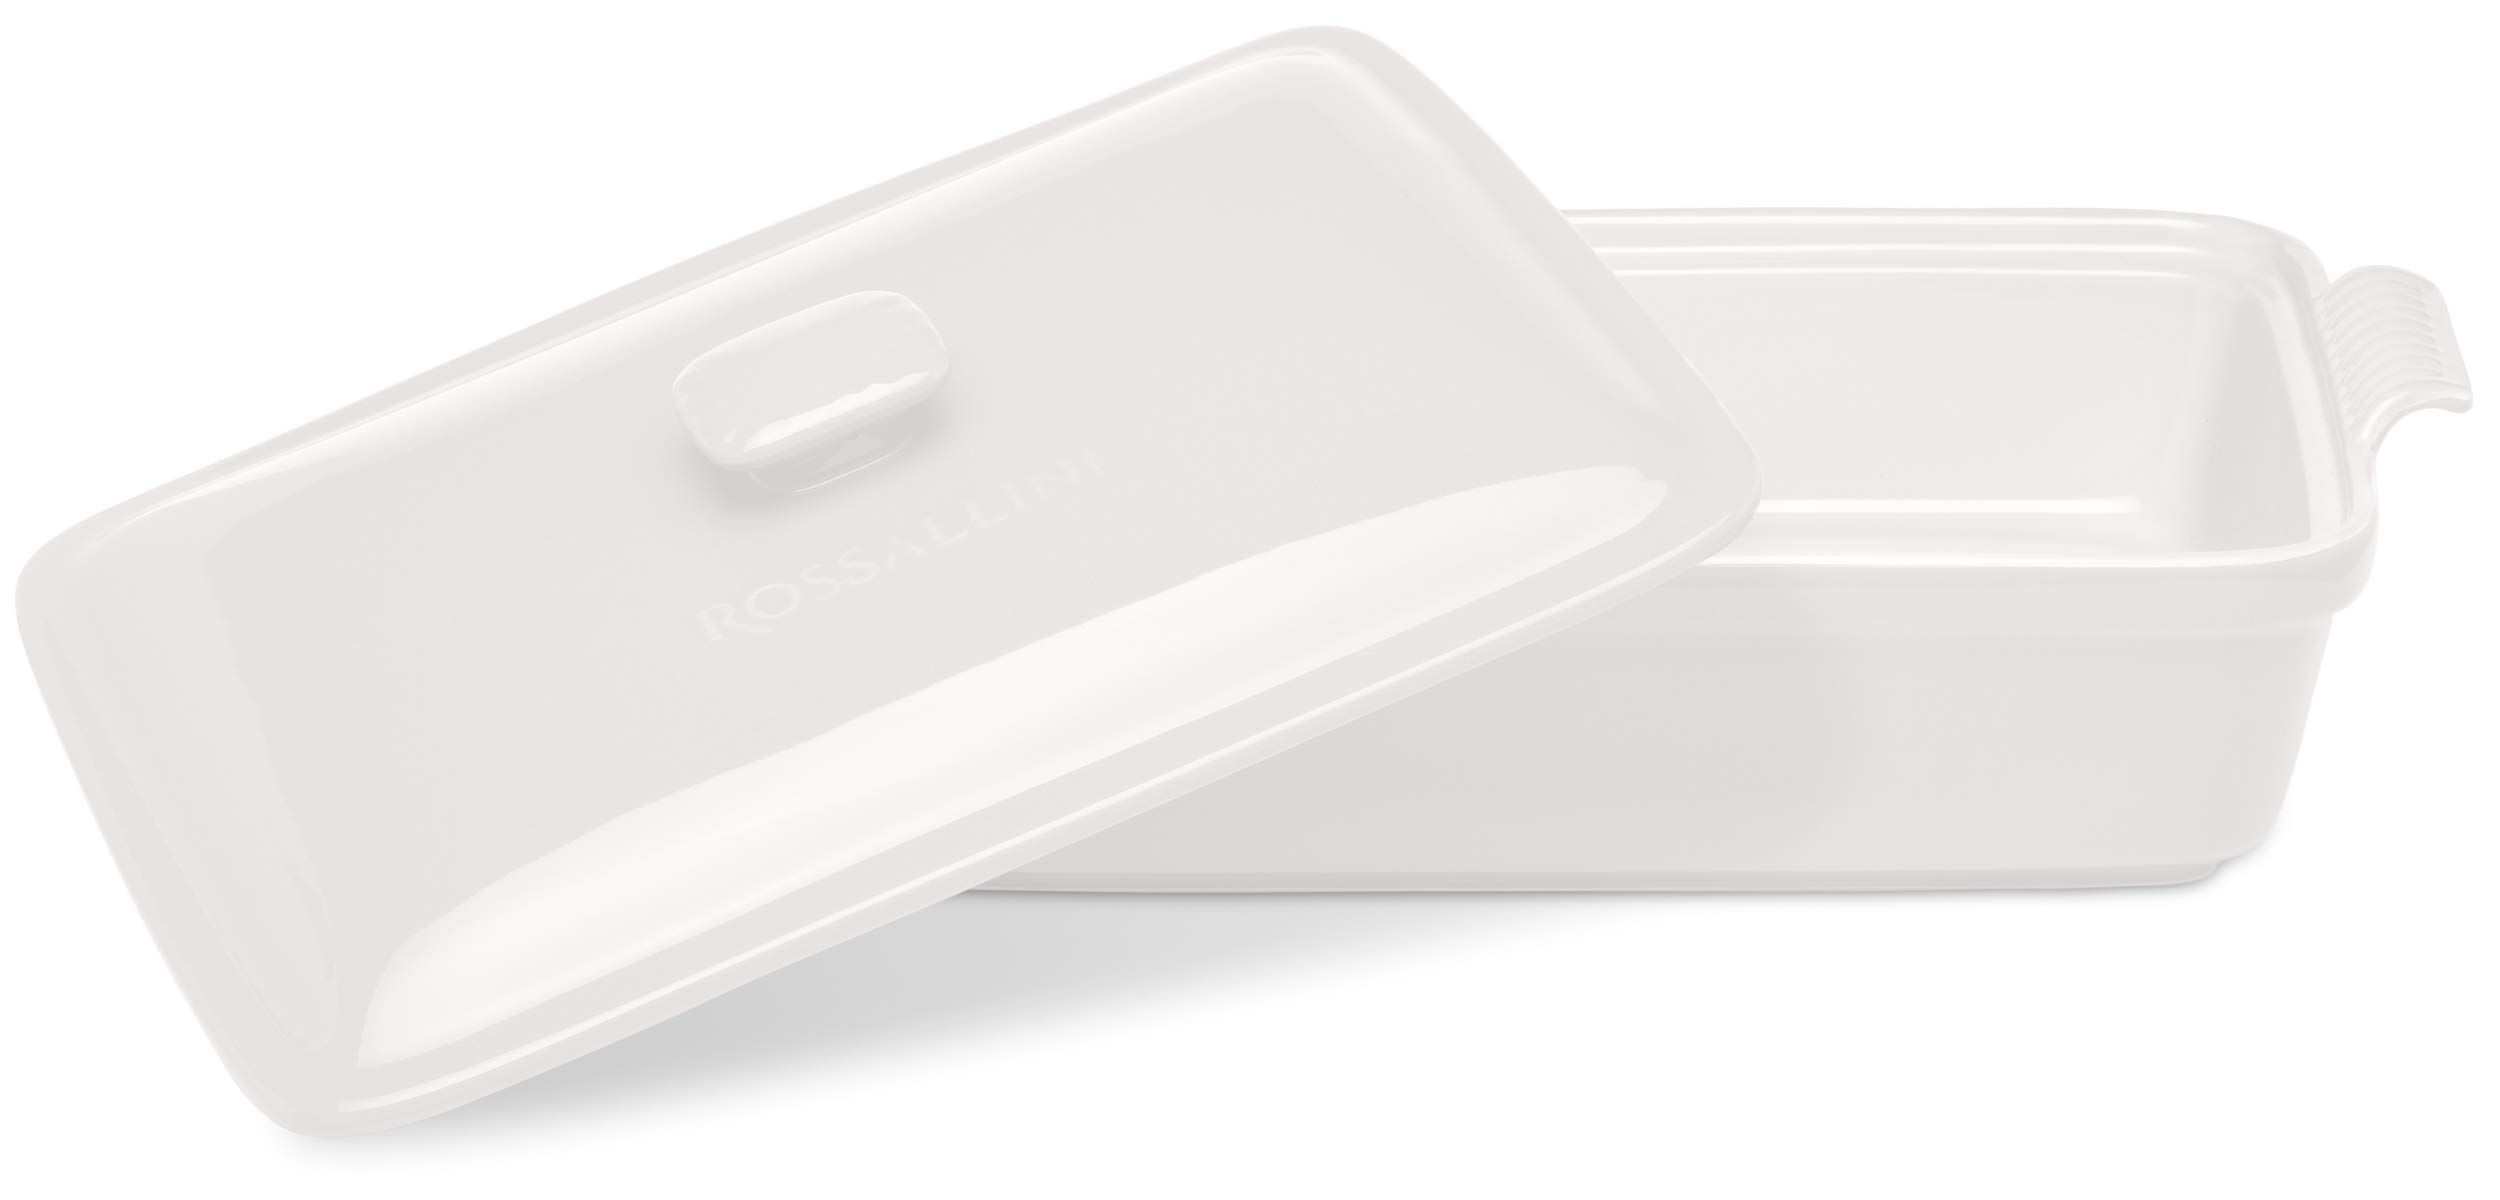 ROSSALLINI Stoneware Casserole Dish Bakeware Set with Lid, Covered Rectangular Dinnerware, Extra Large 4.23 Quart, 13 by 9 Inch, Bianco [White]